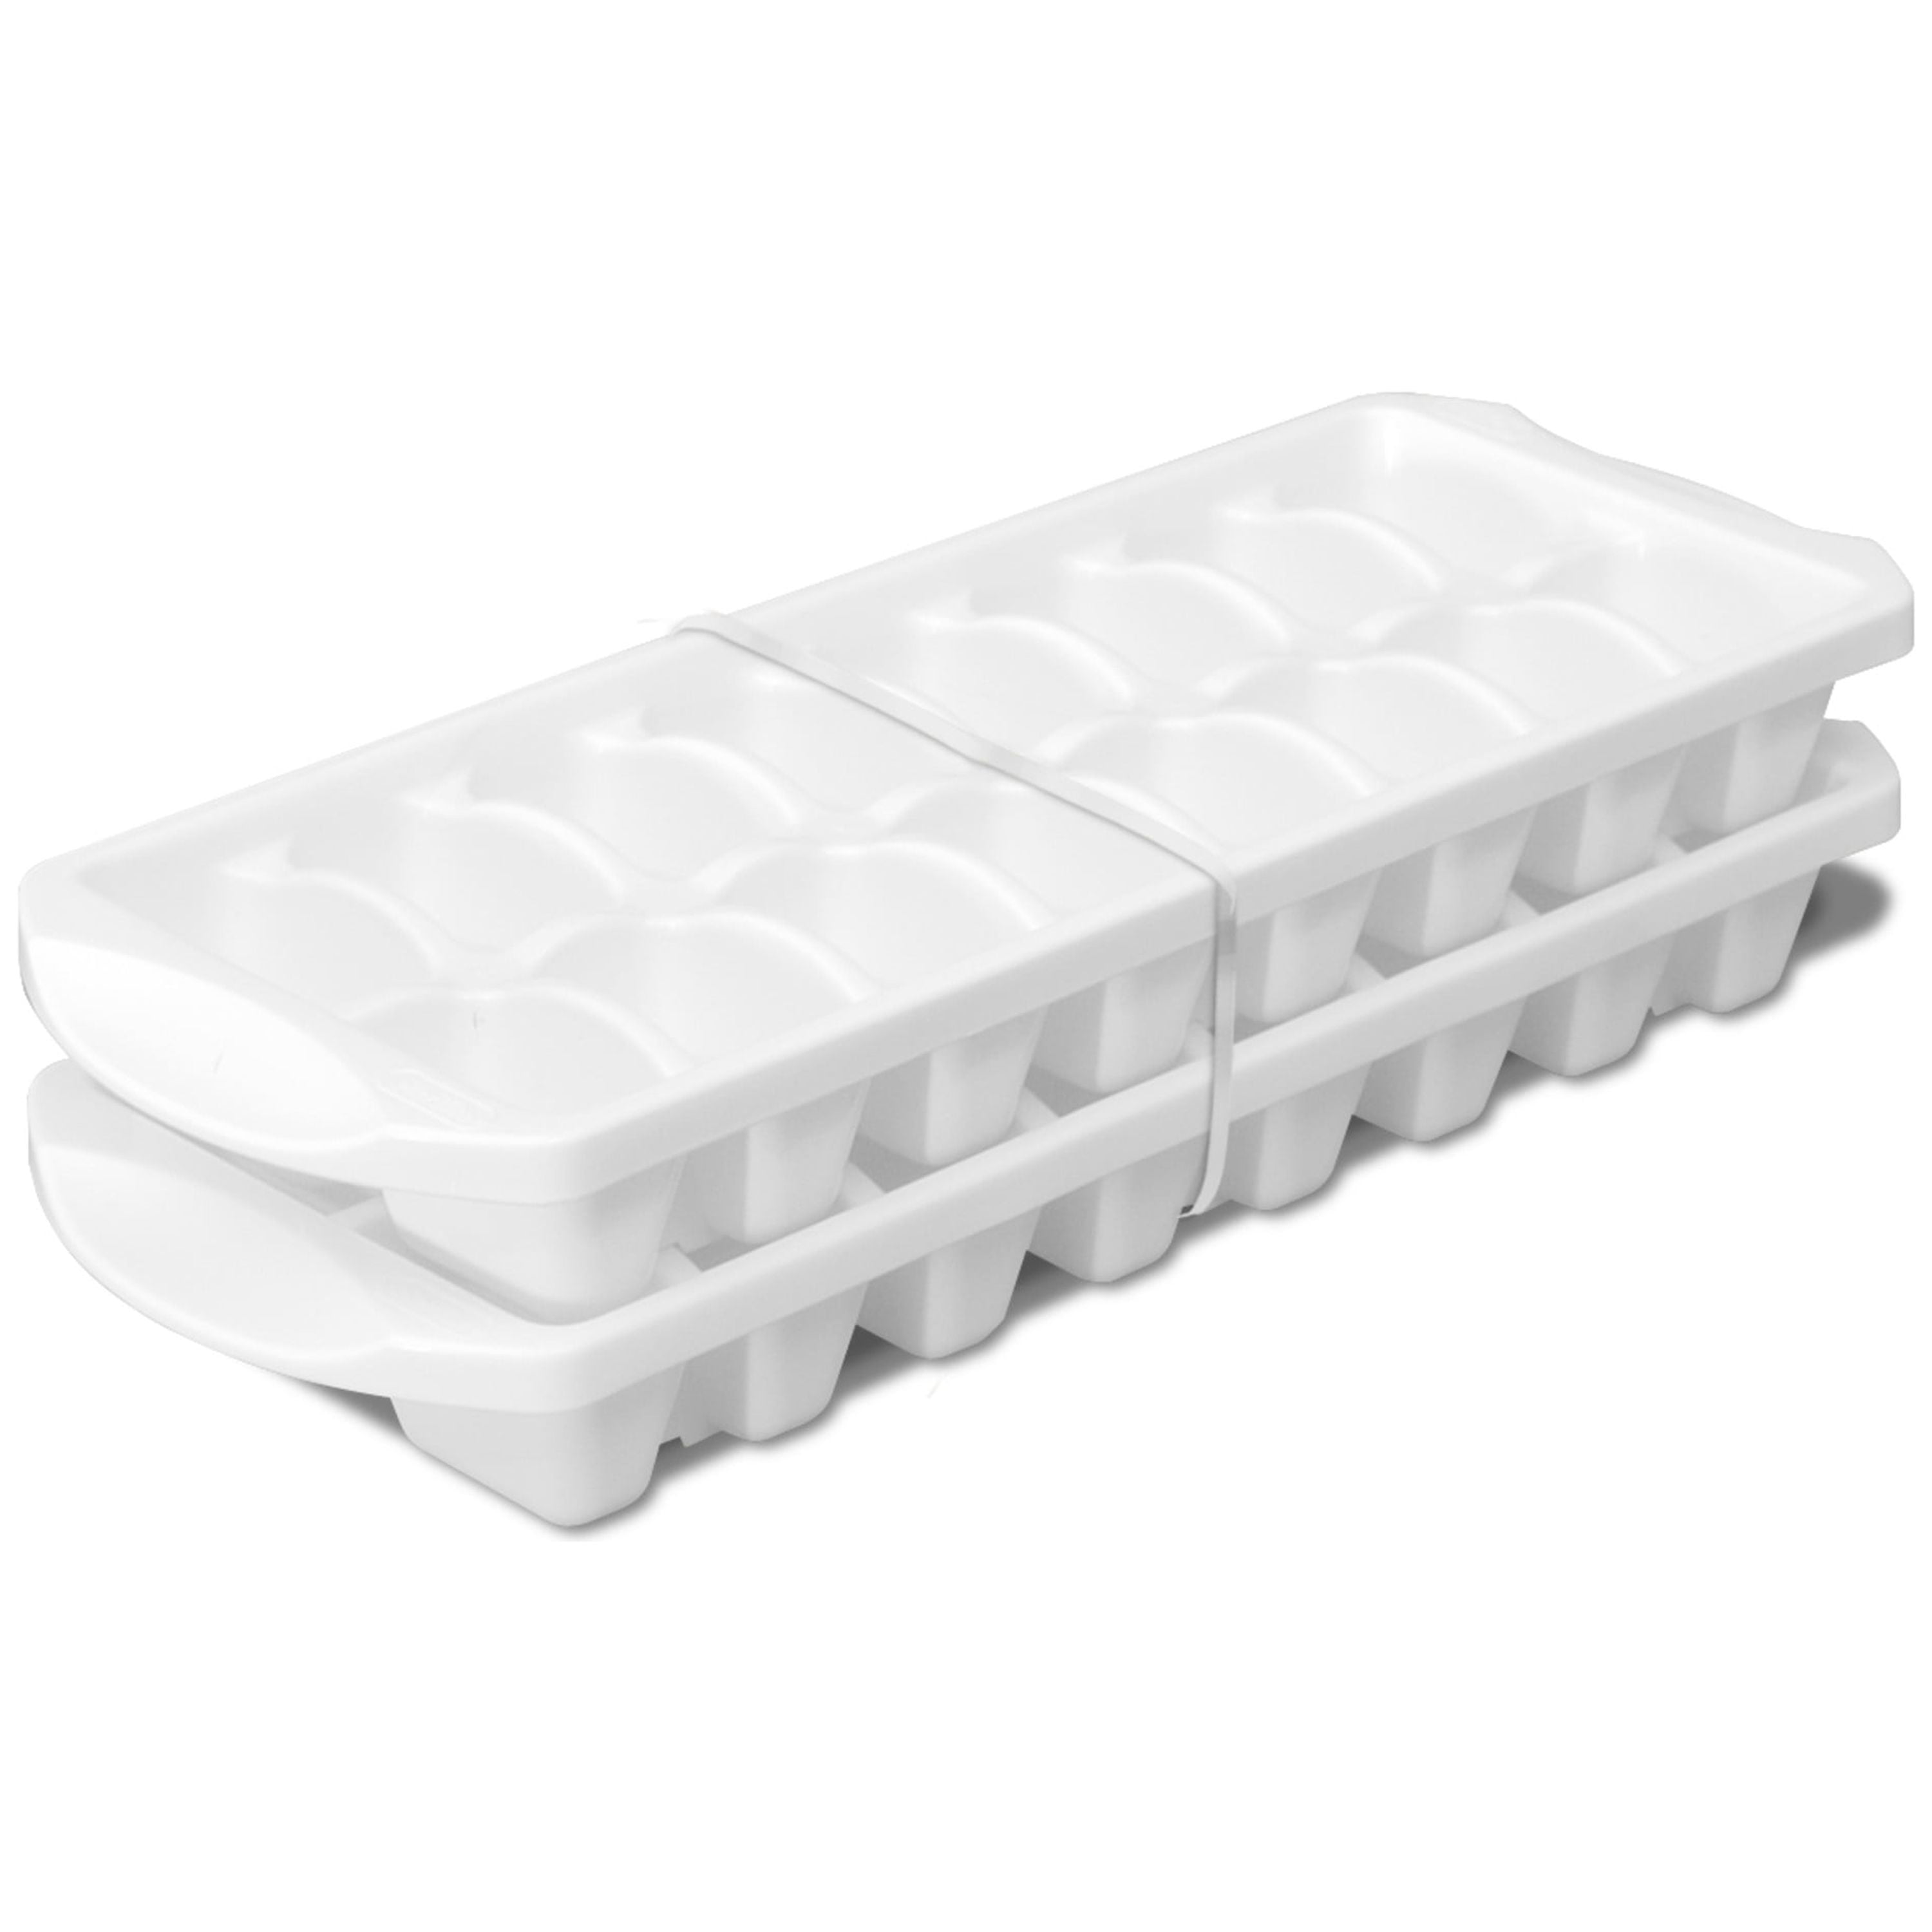 Rubbermaid® Easy Release Ice Cube Tray